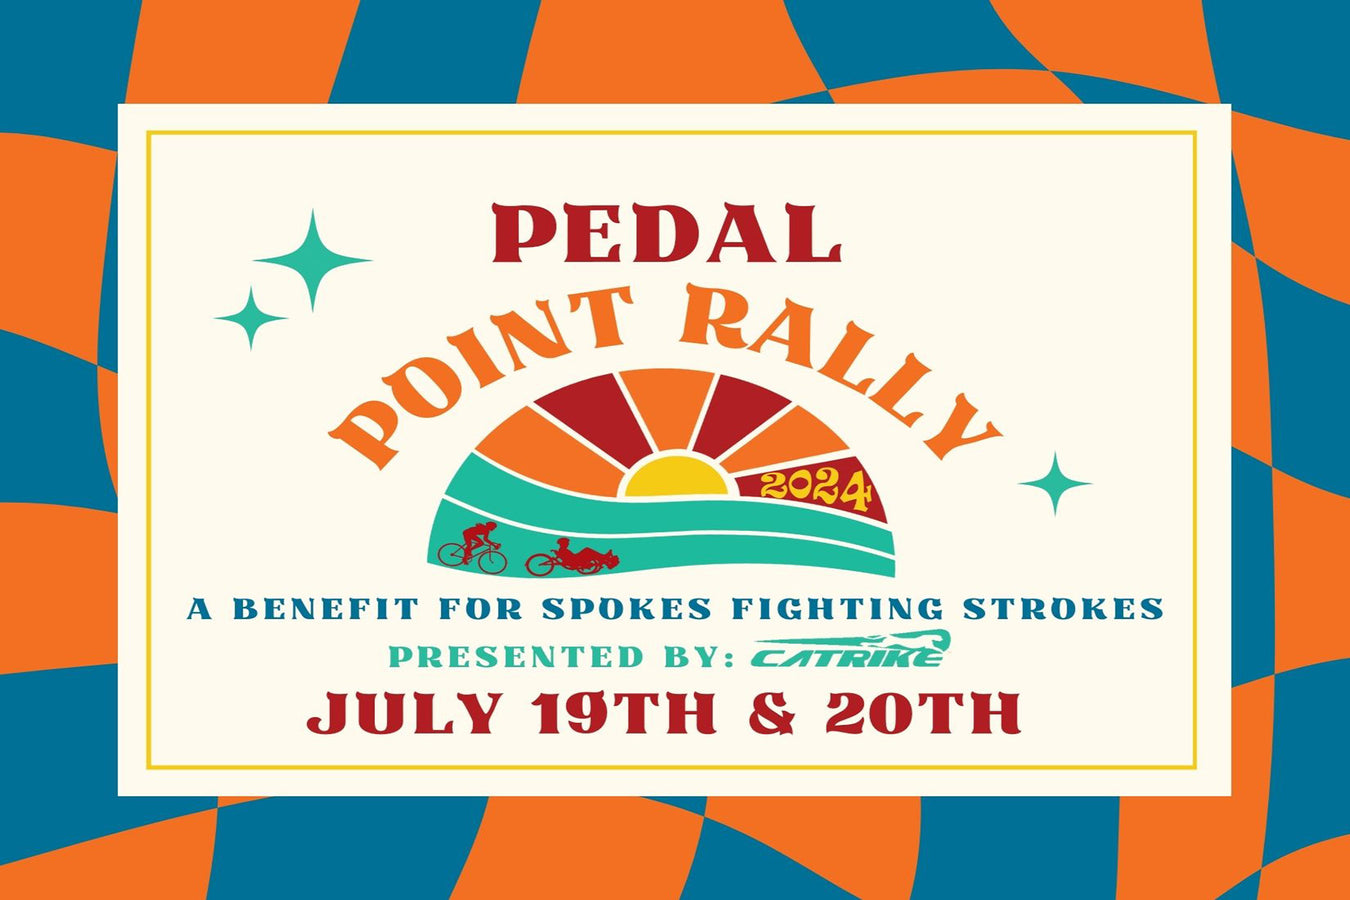 An image featuring the Pedal Point Rally date on July 19th and 20th, 2024.